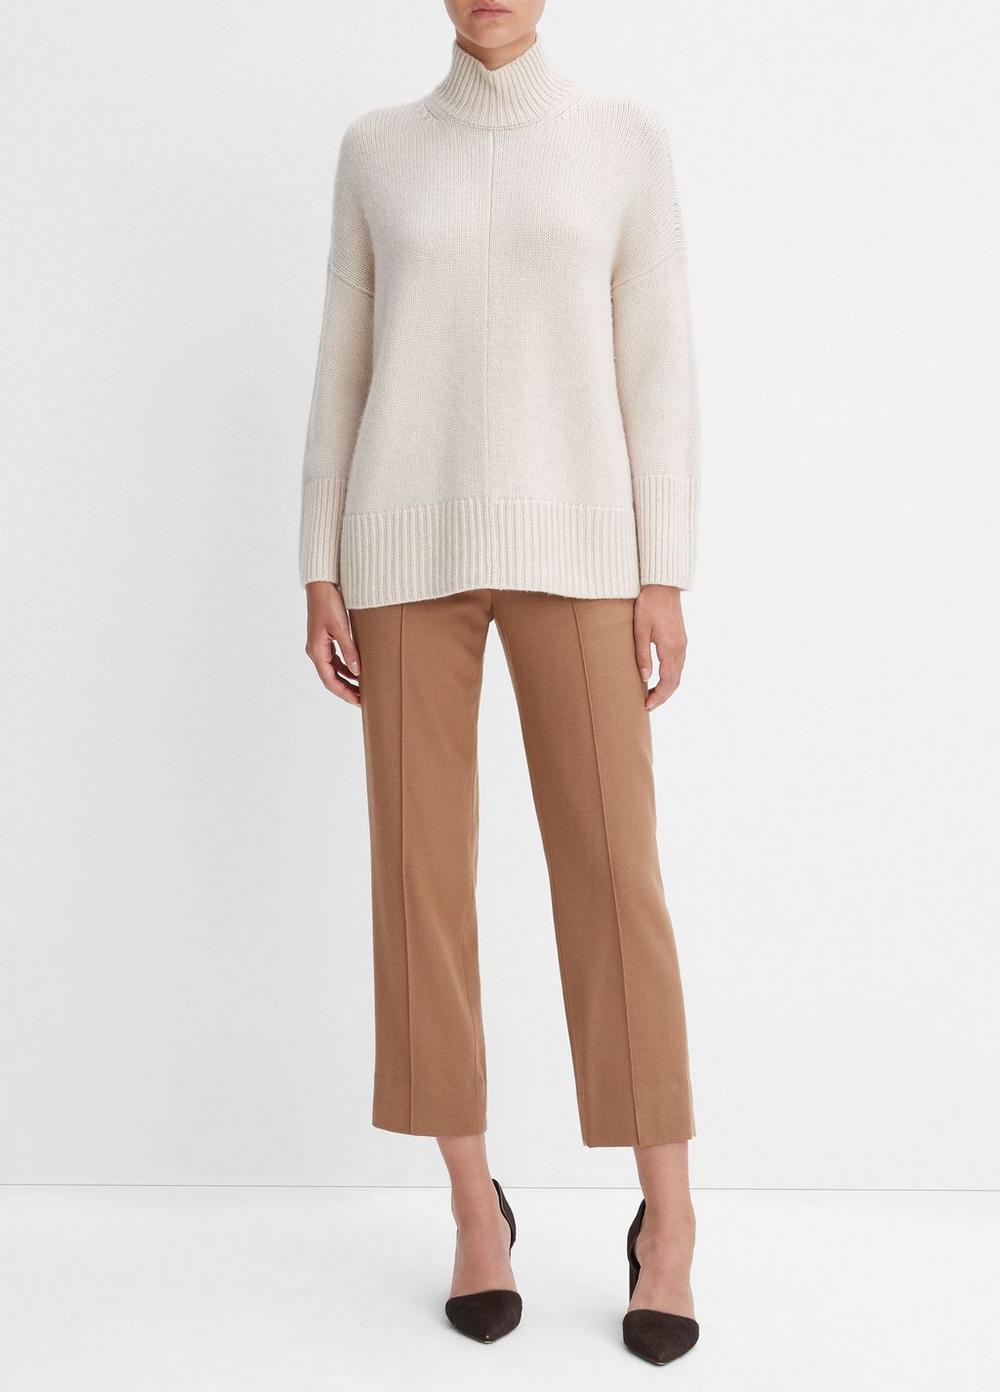 Wool And Cashmere Trapeze Turtleneck Sweater, Heather Latte, Size M/L Vince